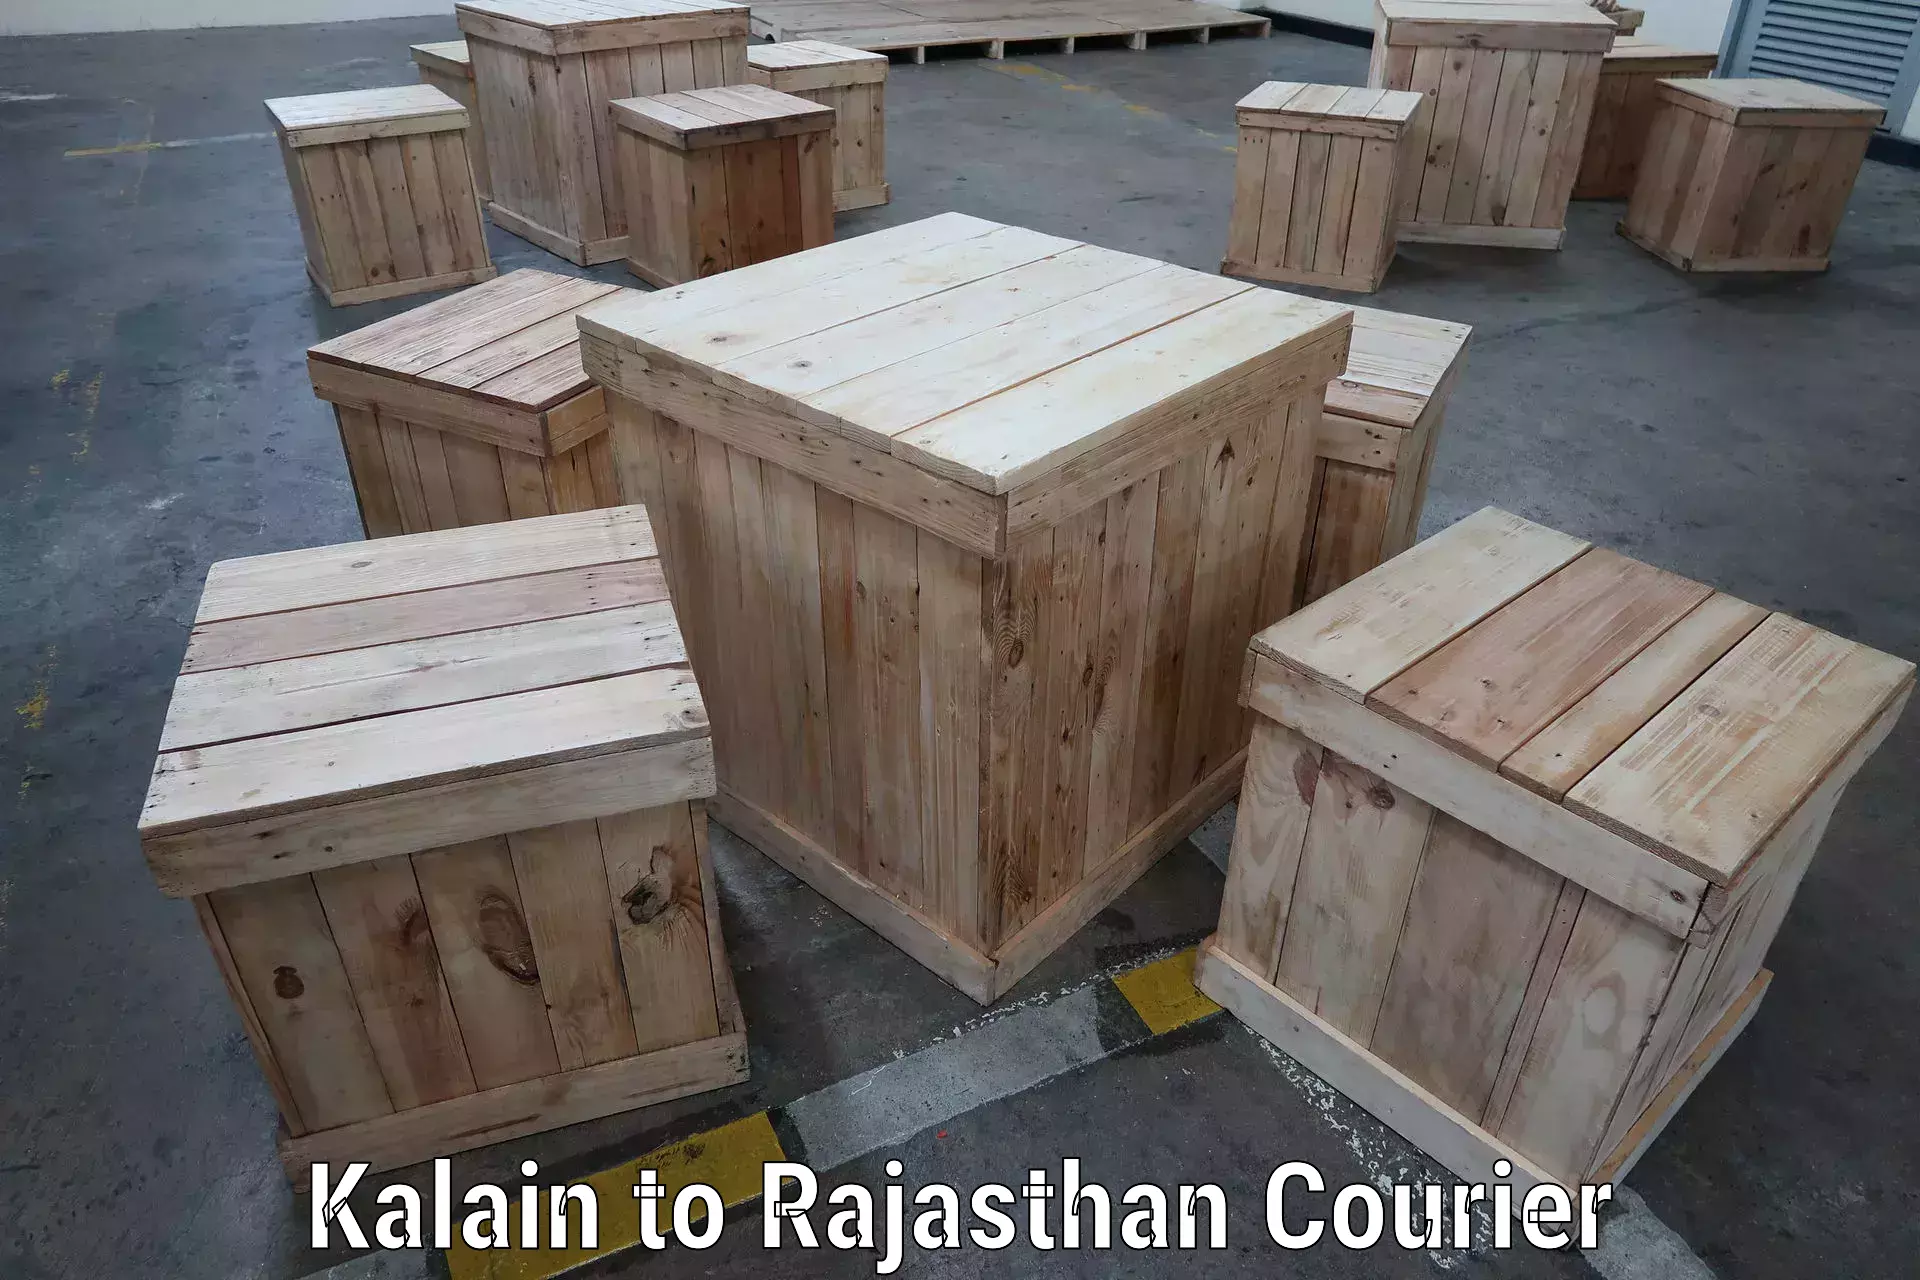 State-of-the-art courier technology Kalain to Udaipurwati